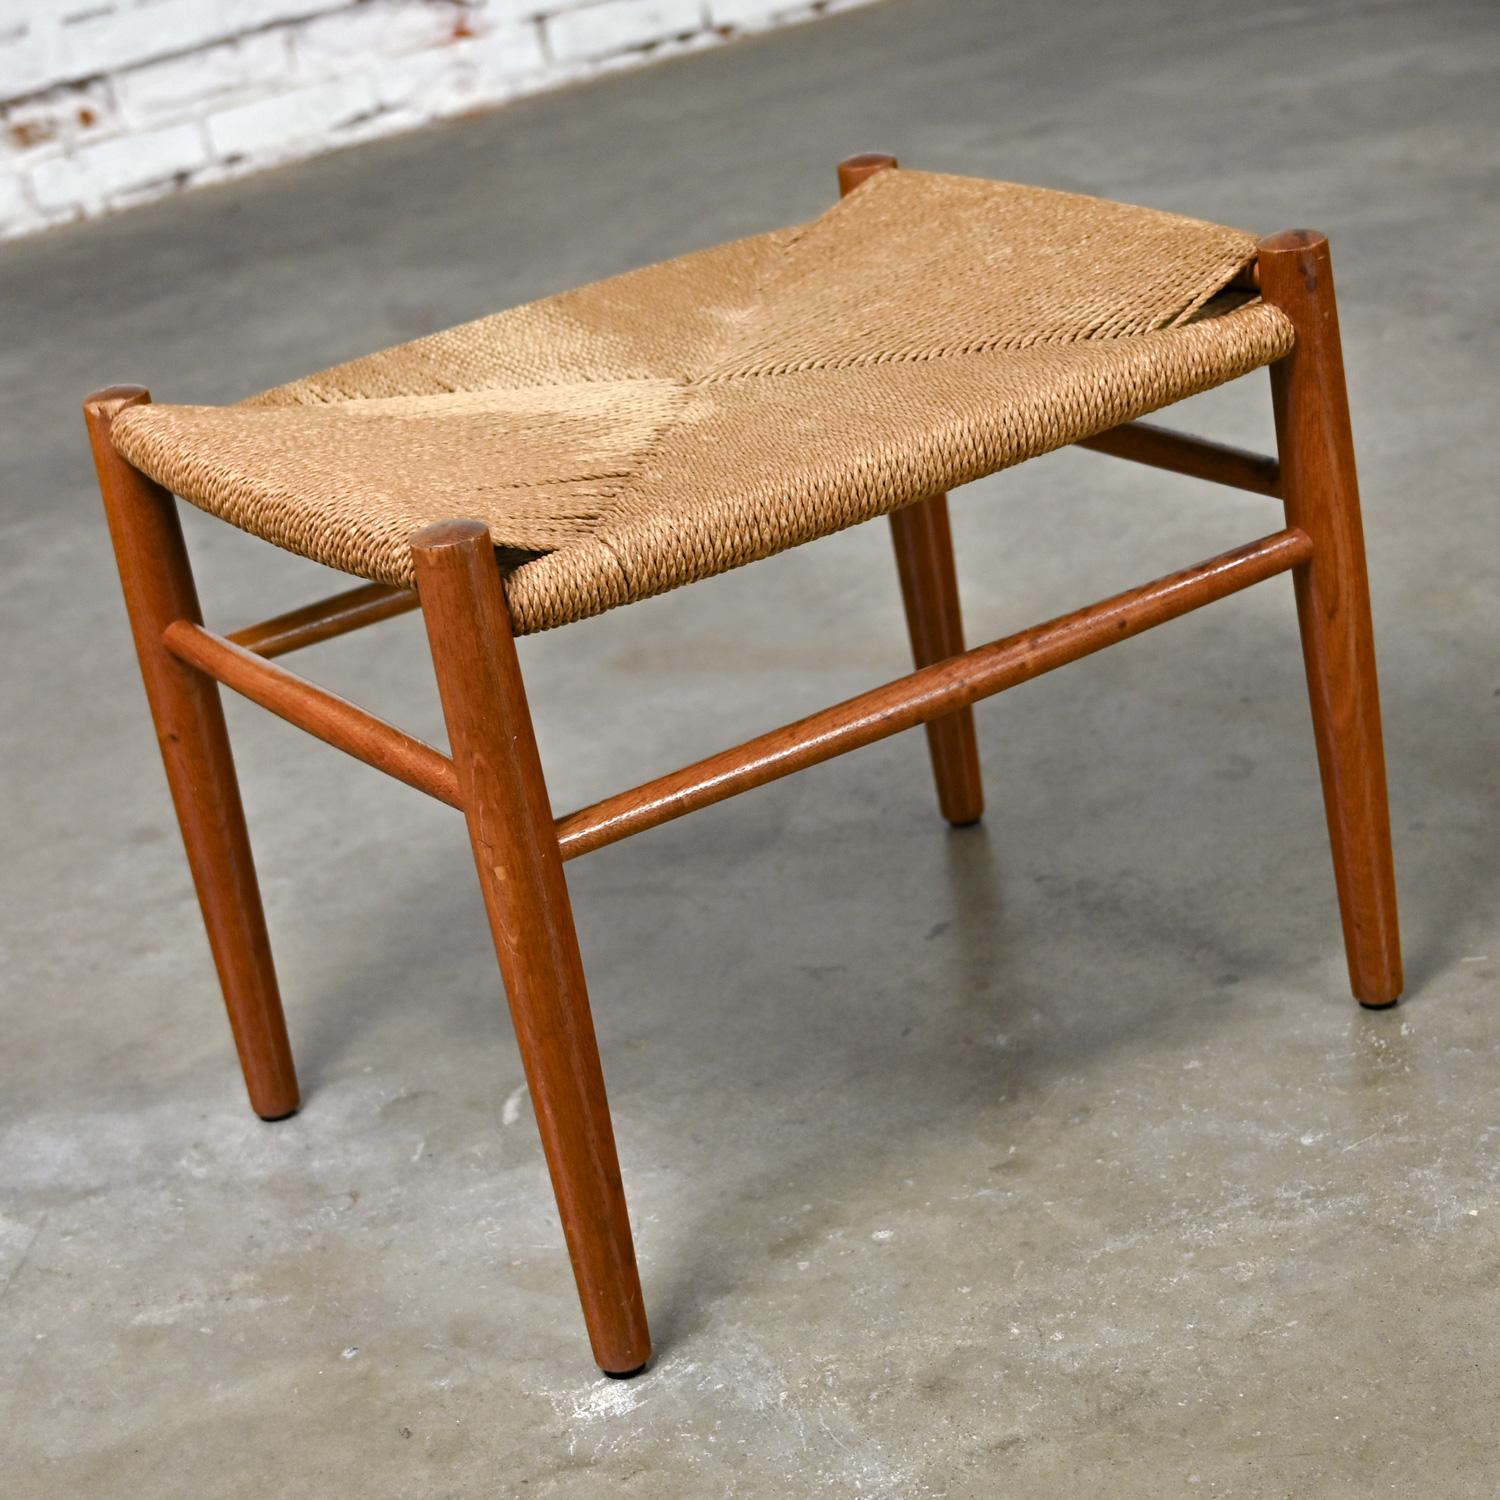 Mid-20th Century Scandinavian Modern Low Stool Teak with Natural Paper Cord Seat 1